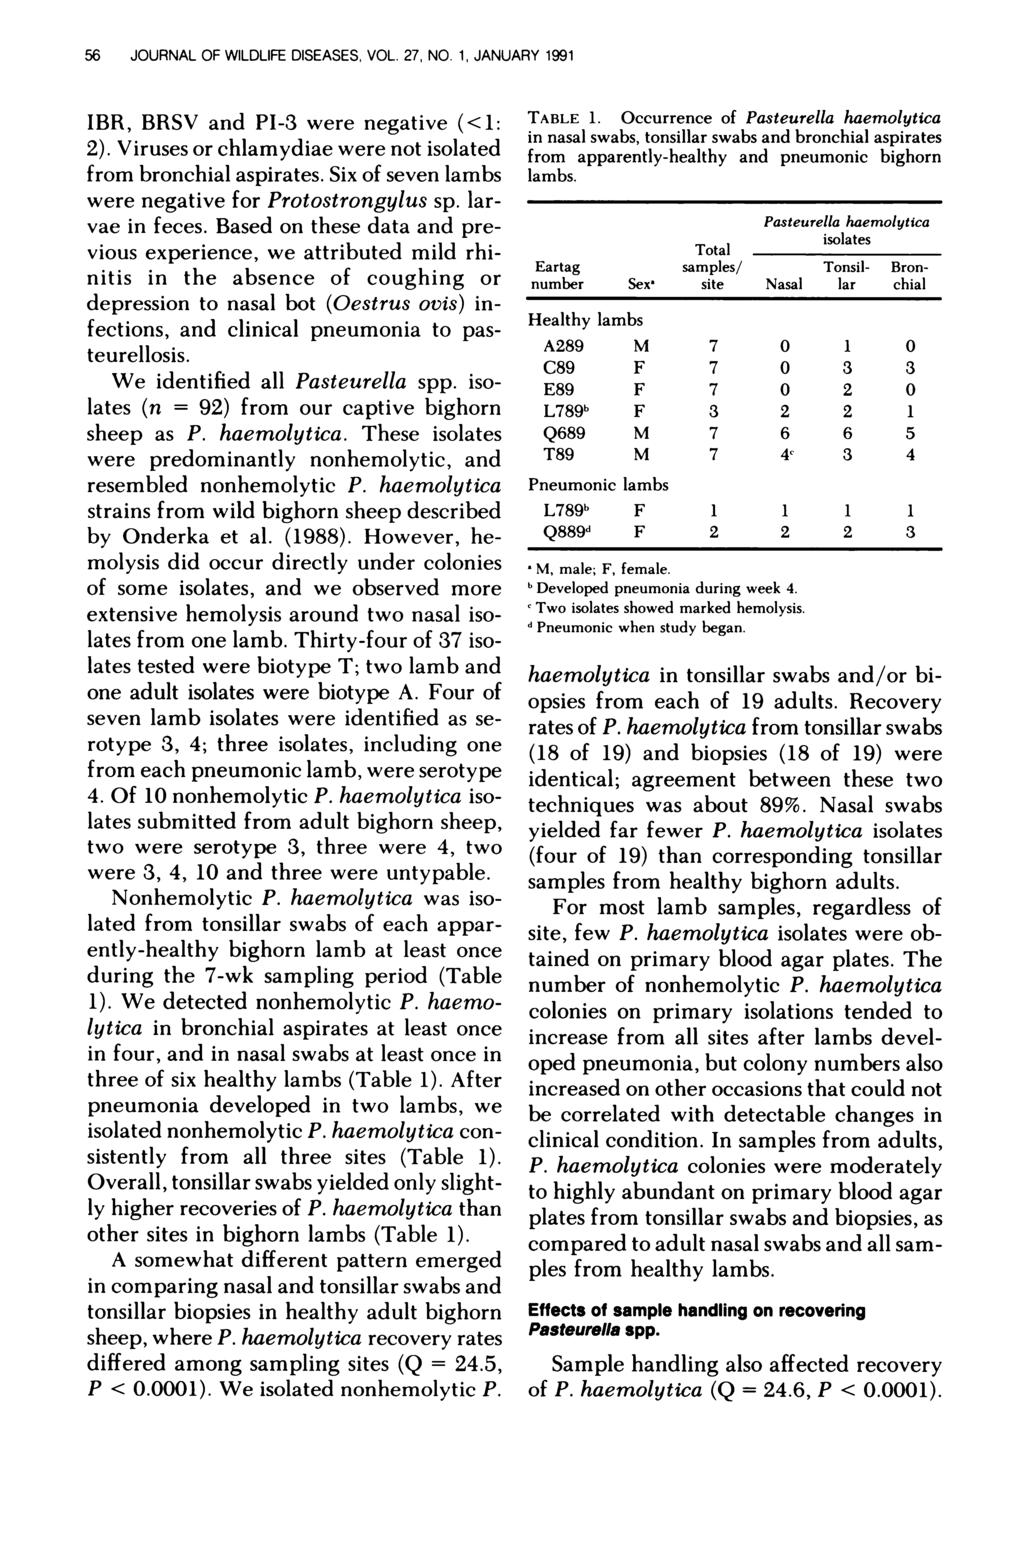 56 JOURNAL OF WILDLIFE DISEASES, VOL. 27, NO. 1, JANUARY 1991 IBR, BRSV and P1-3 were negative (<1: 2). Viruses or chlamydiae were not isolated from bronchial aspirates.